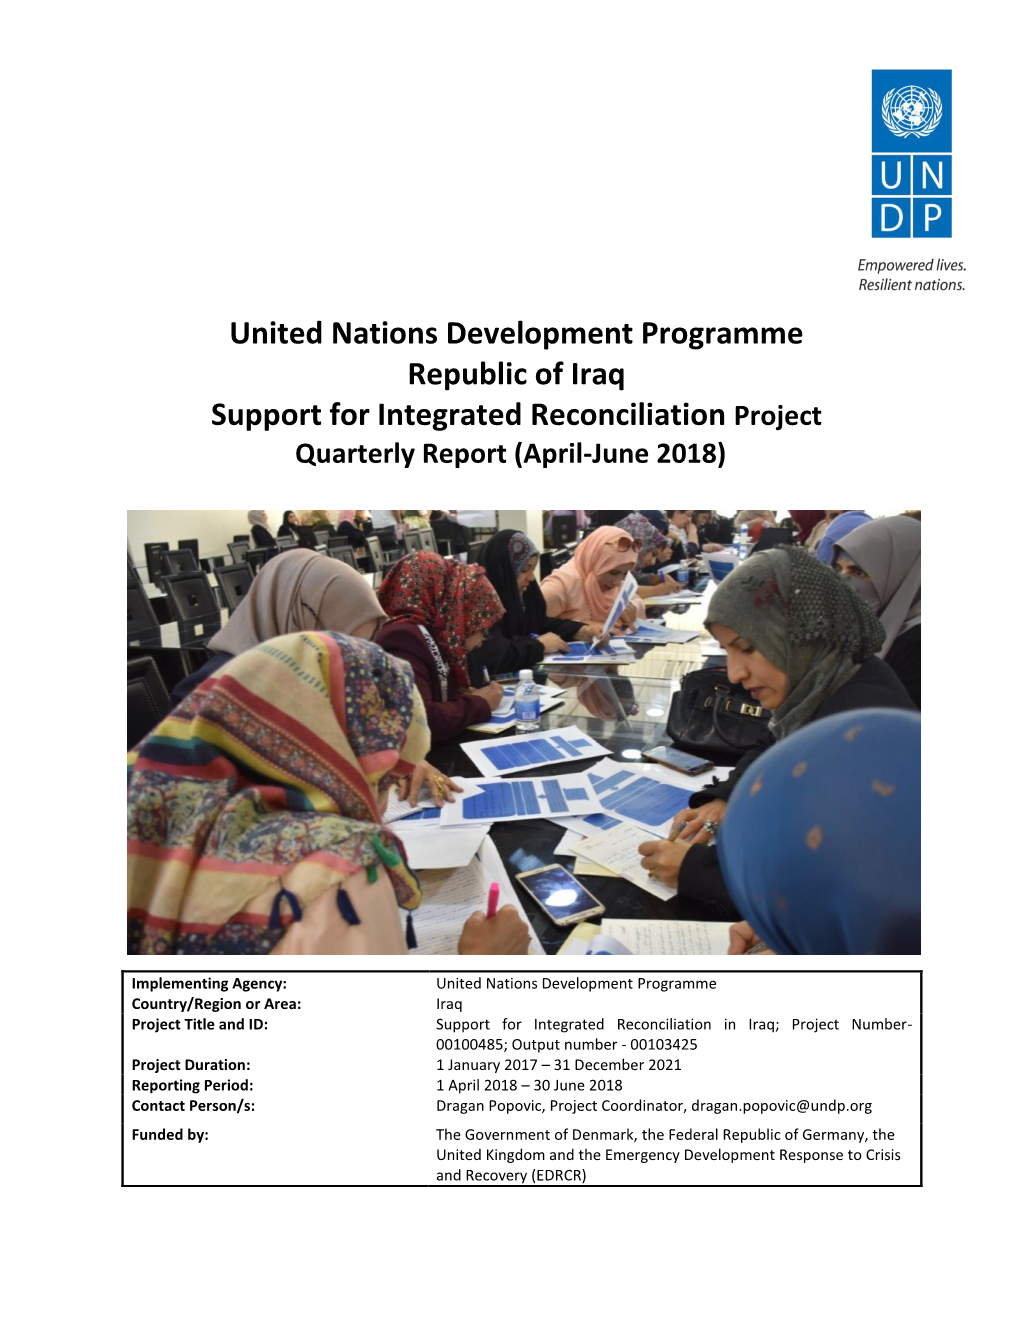 United Nations Development Programme Republic of Iraq Support for Integrated Reconciliation Project Quarterly Report (April-June 2018)